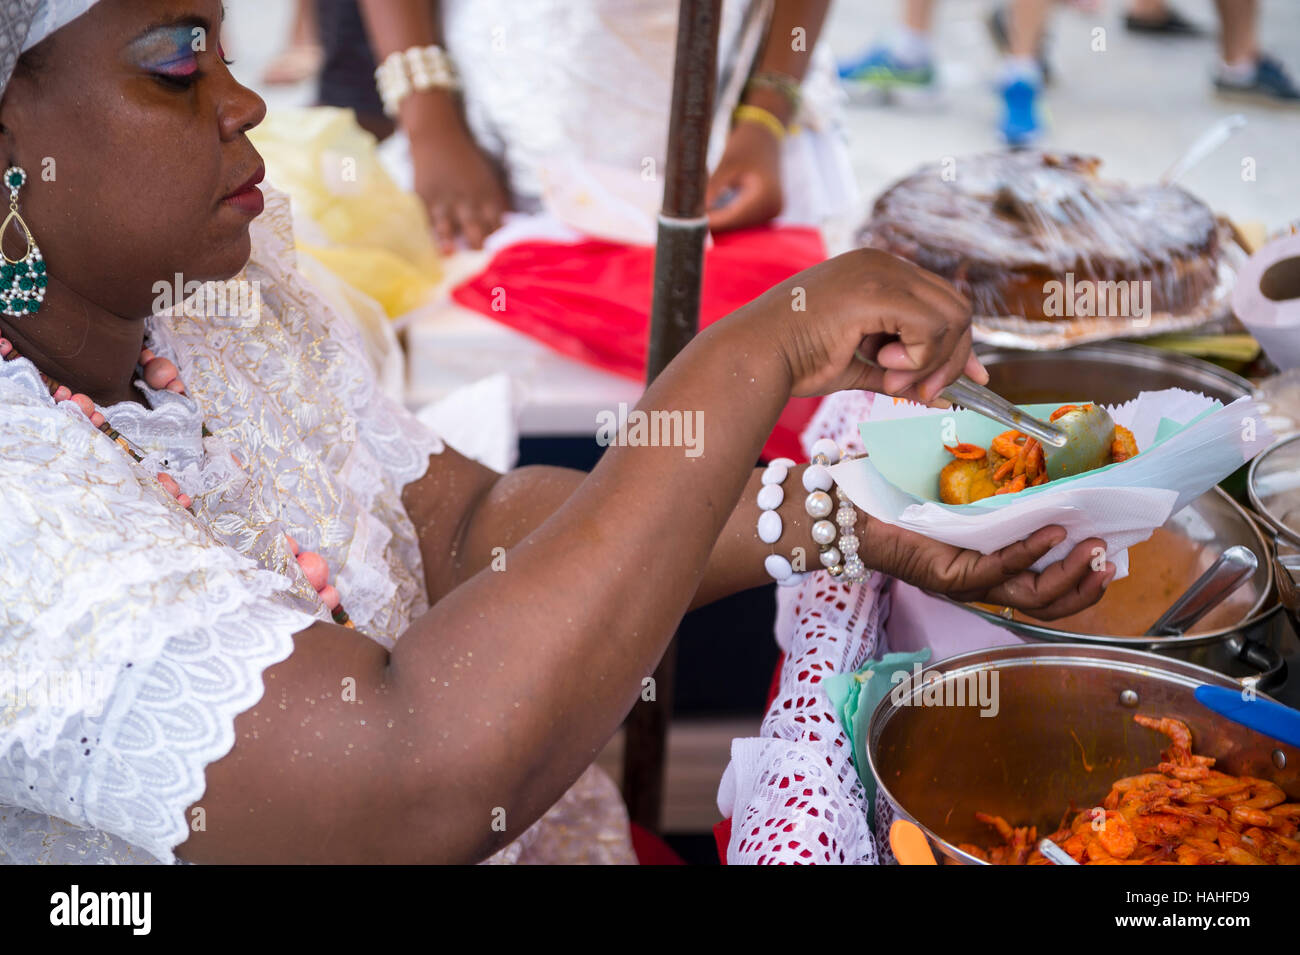 SALVADOR, BRAZIL - FEBRUARY 02, 2016: Brazilian Baiana woman assembles a plate of traditional acaraje fritters from a stall. Stock Photo